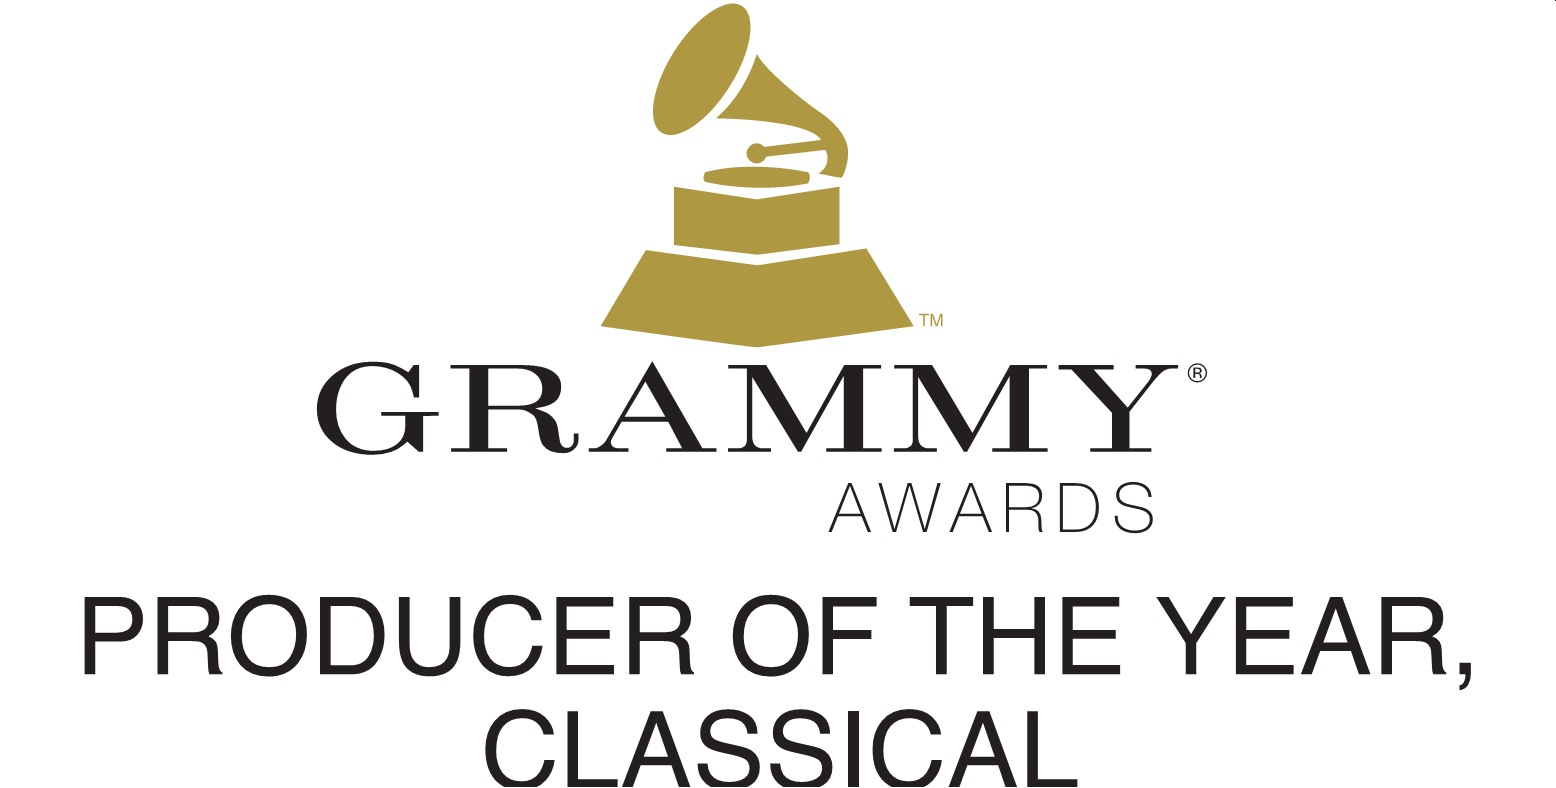 Grammy Award: 'Producer Of The Year, Classical' (2015)